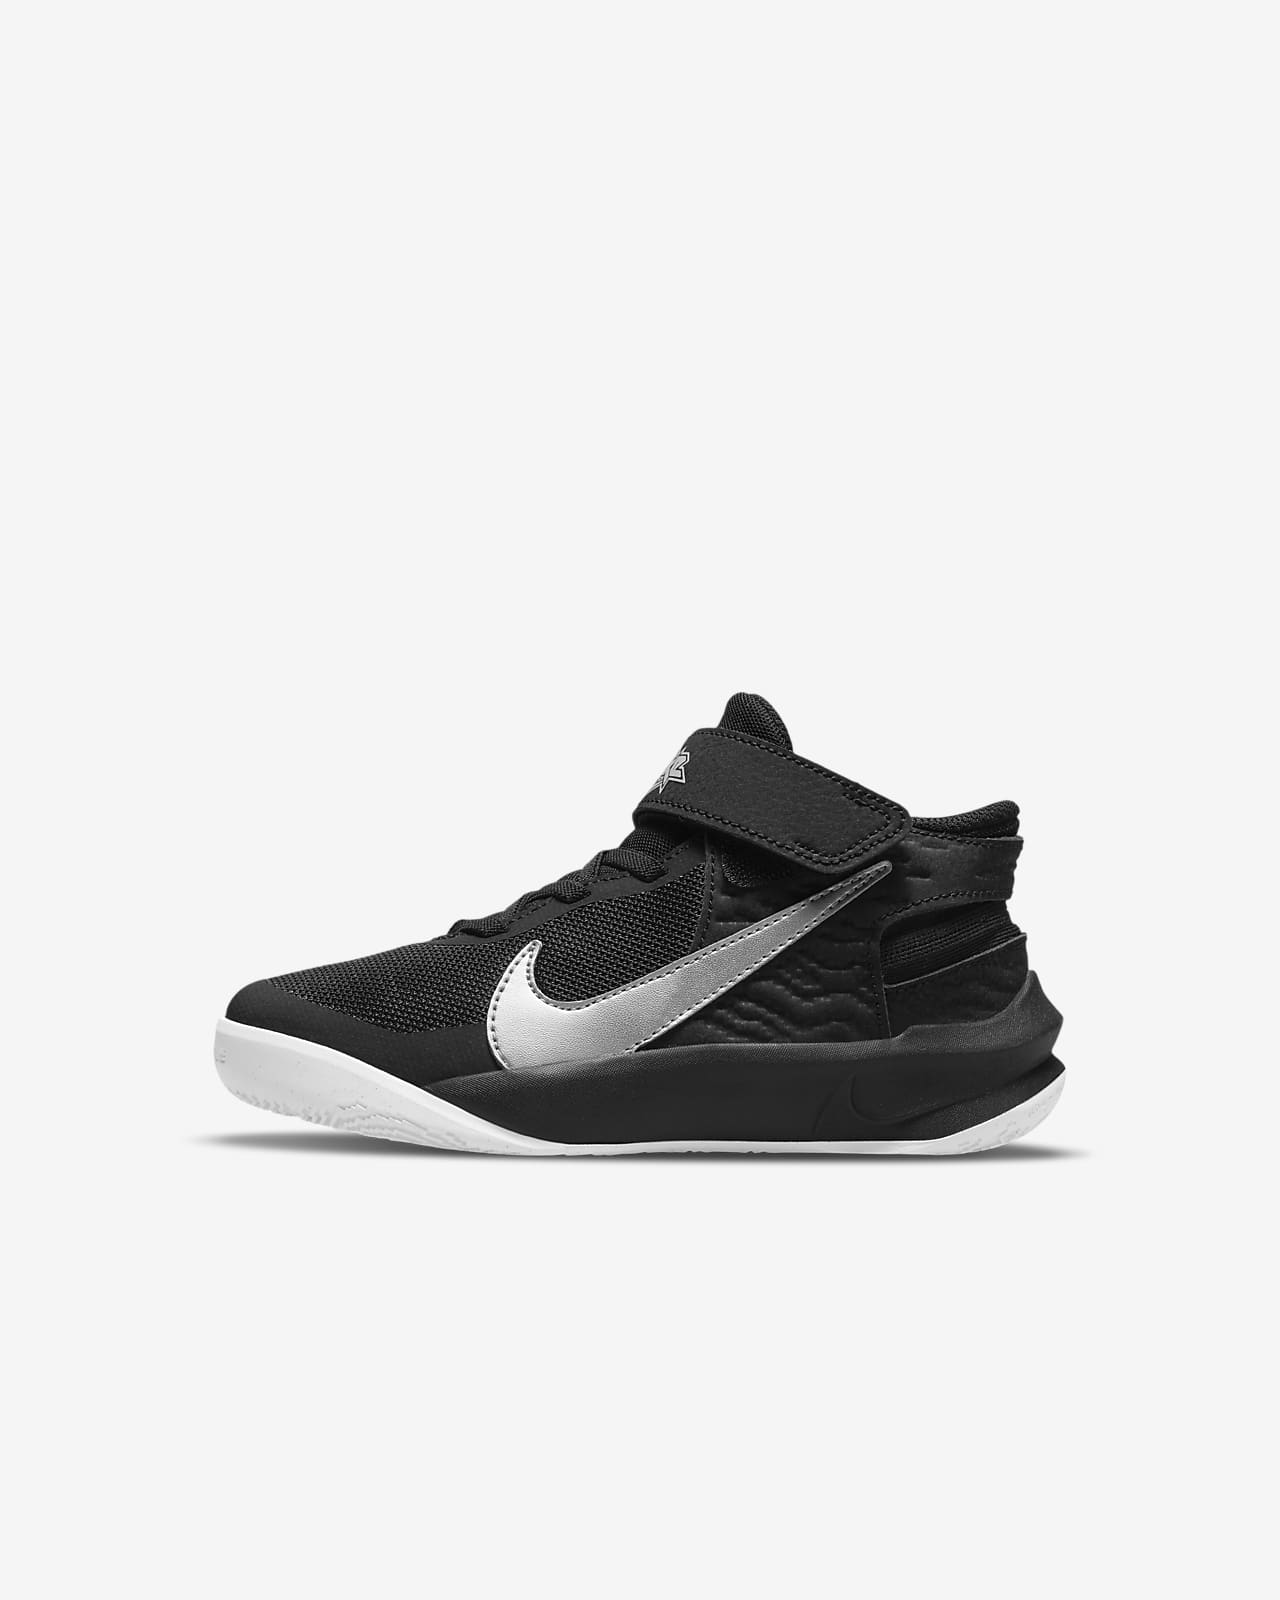 Nike Team Hustle D 10 FlyEase Younger Kids' Shoes